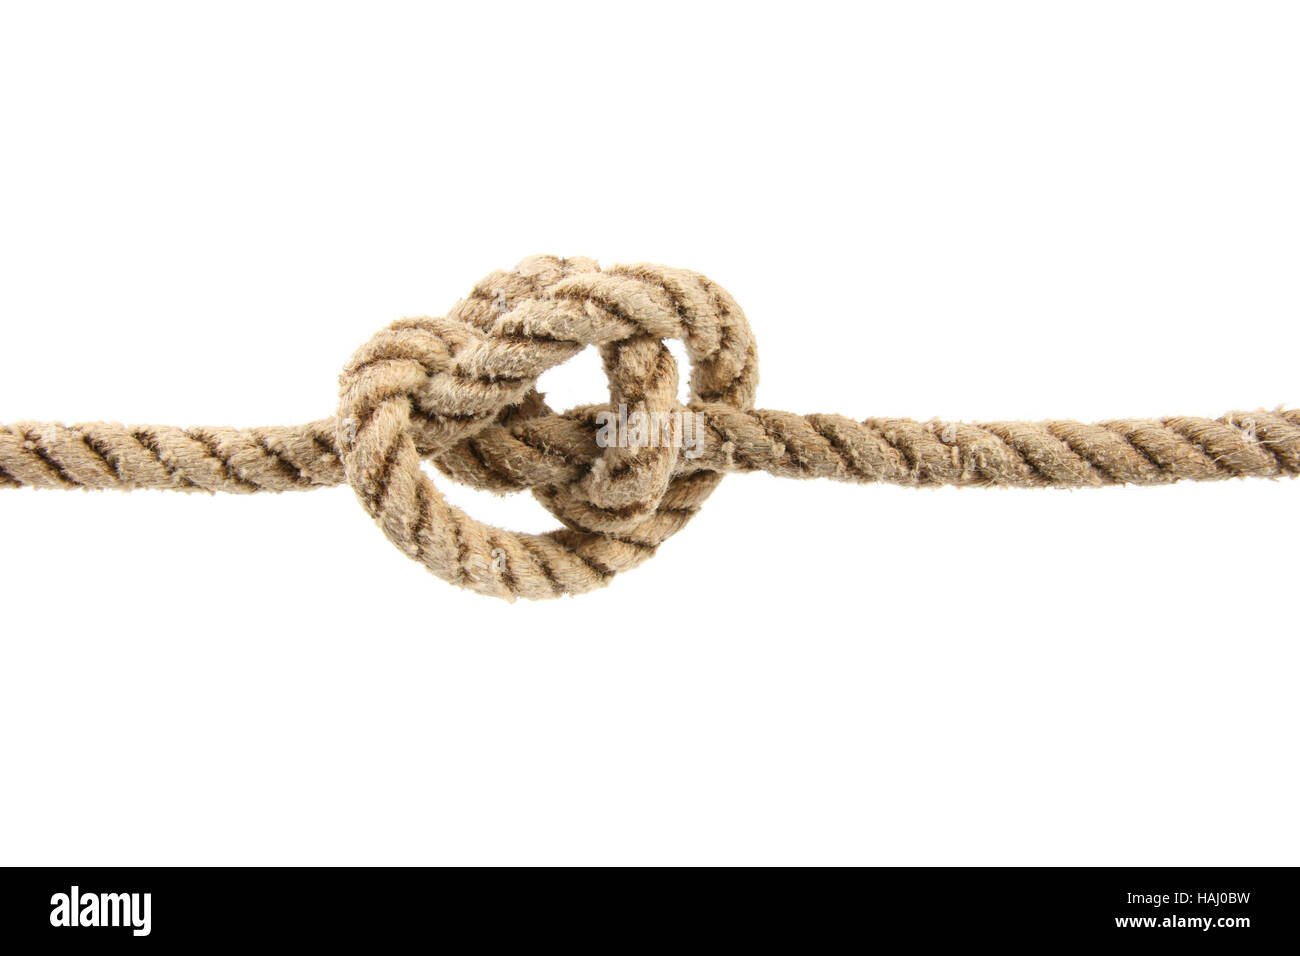 Rope with tied knot Stock Photo